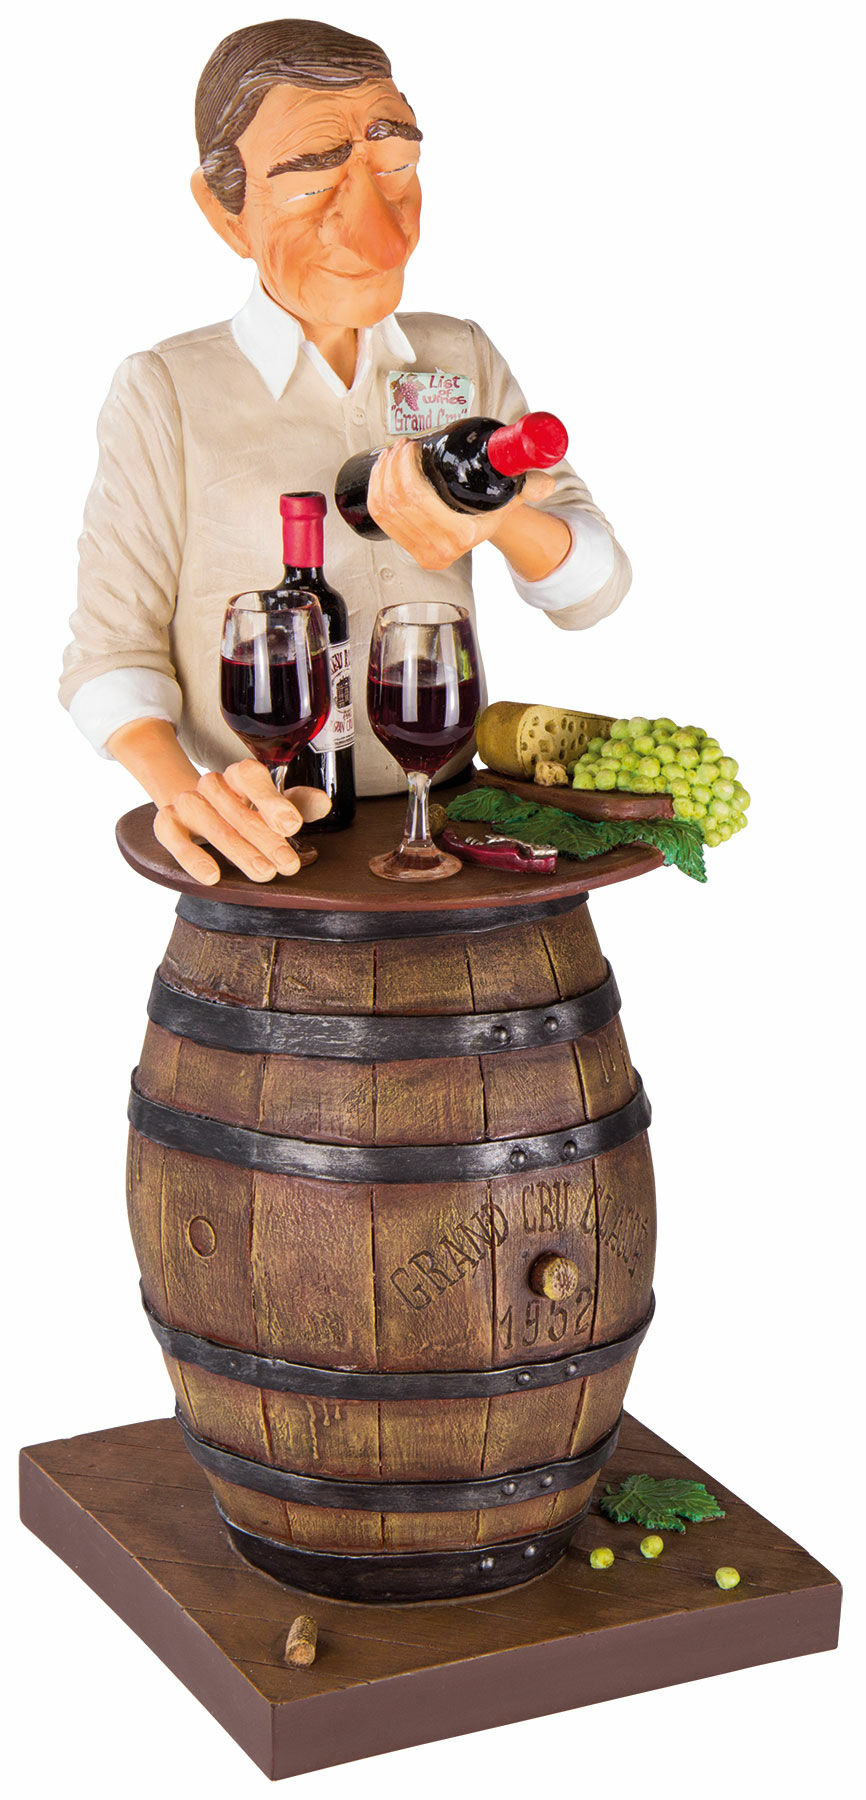 Caricature "The Wine Lover", cast hand-painted by Guillermo Forchino